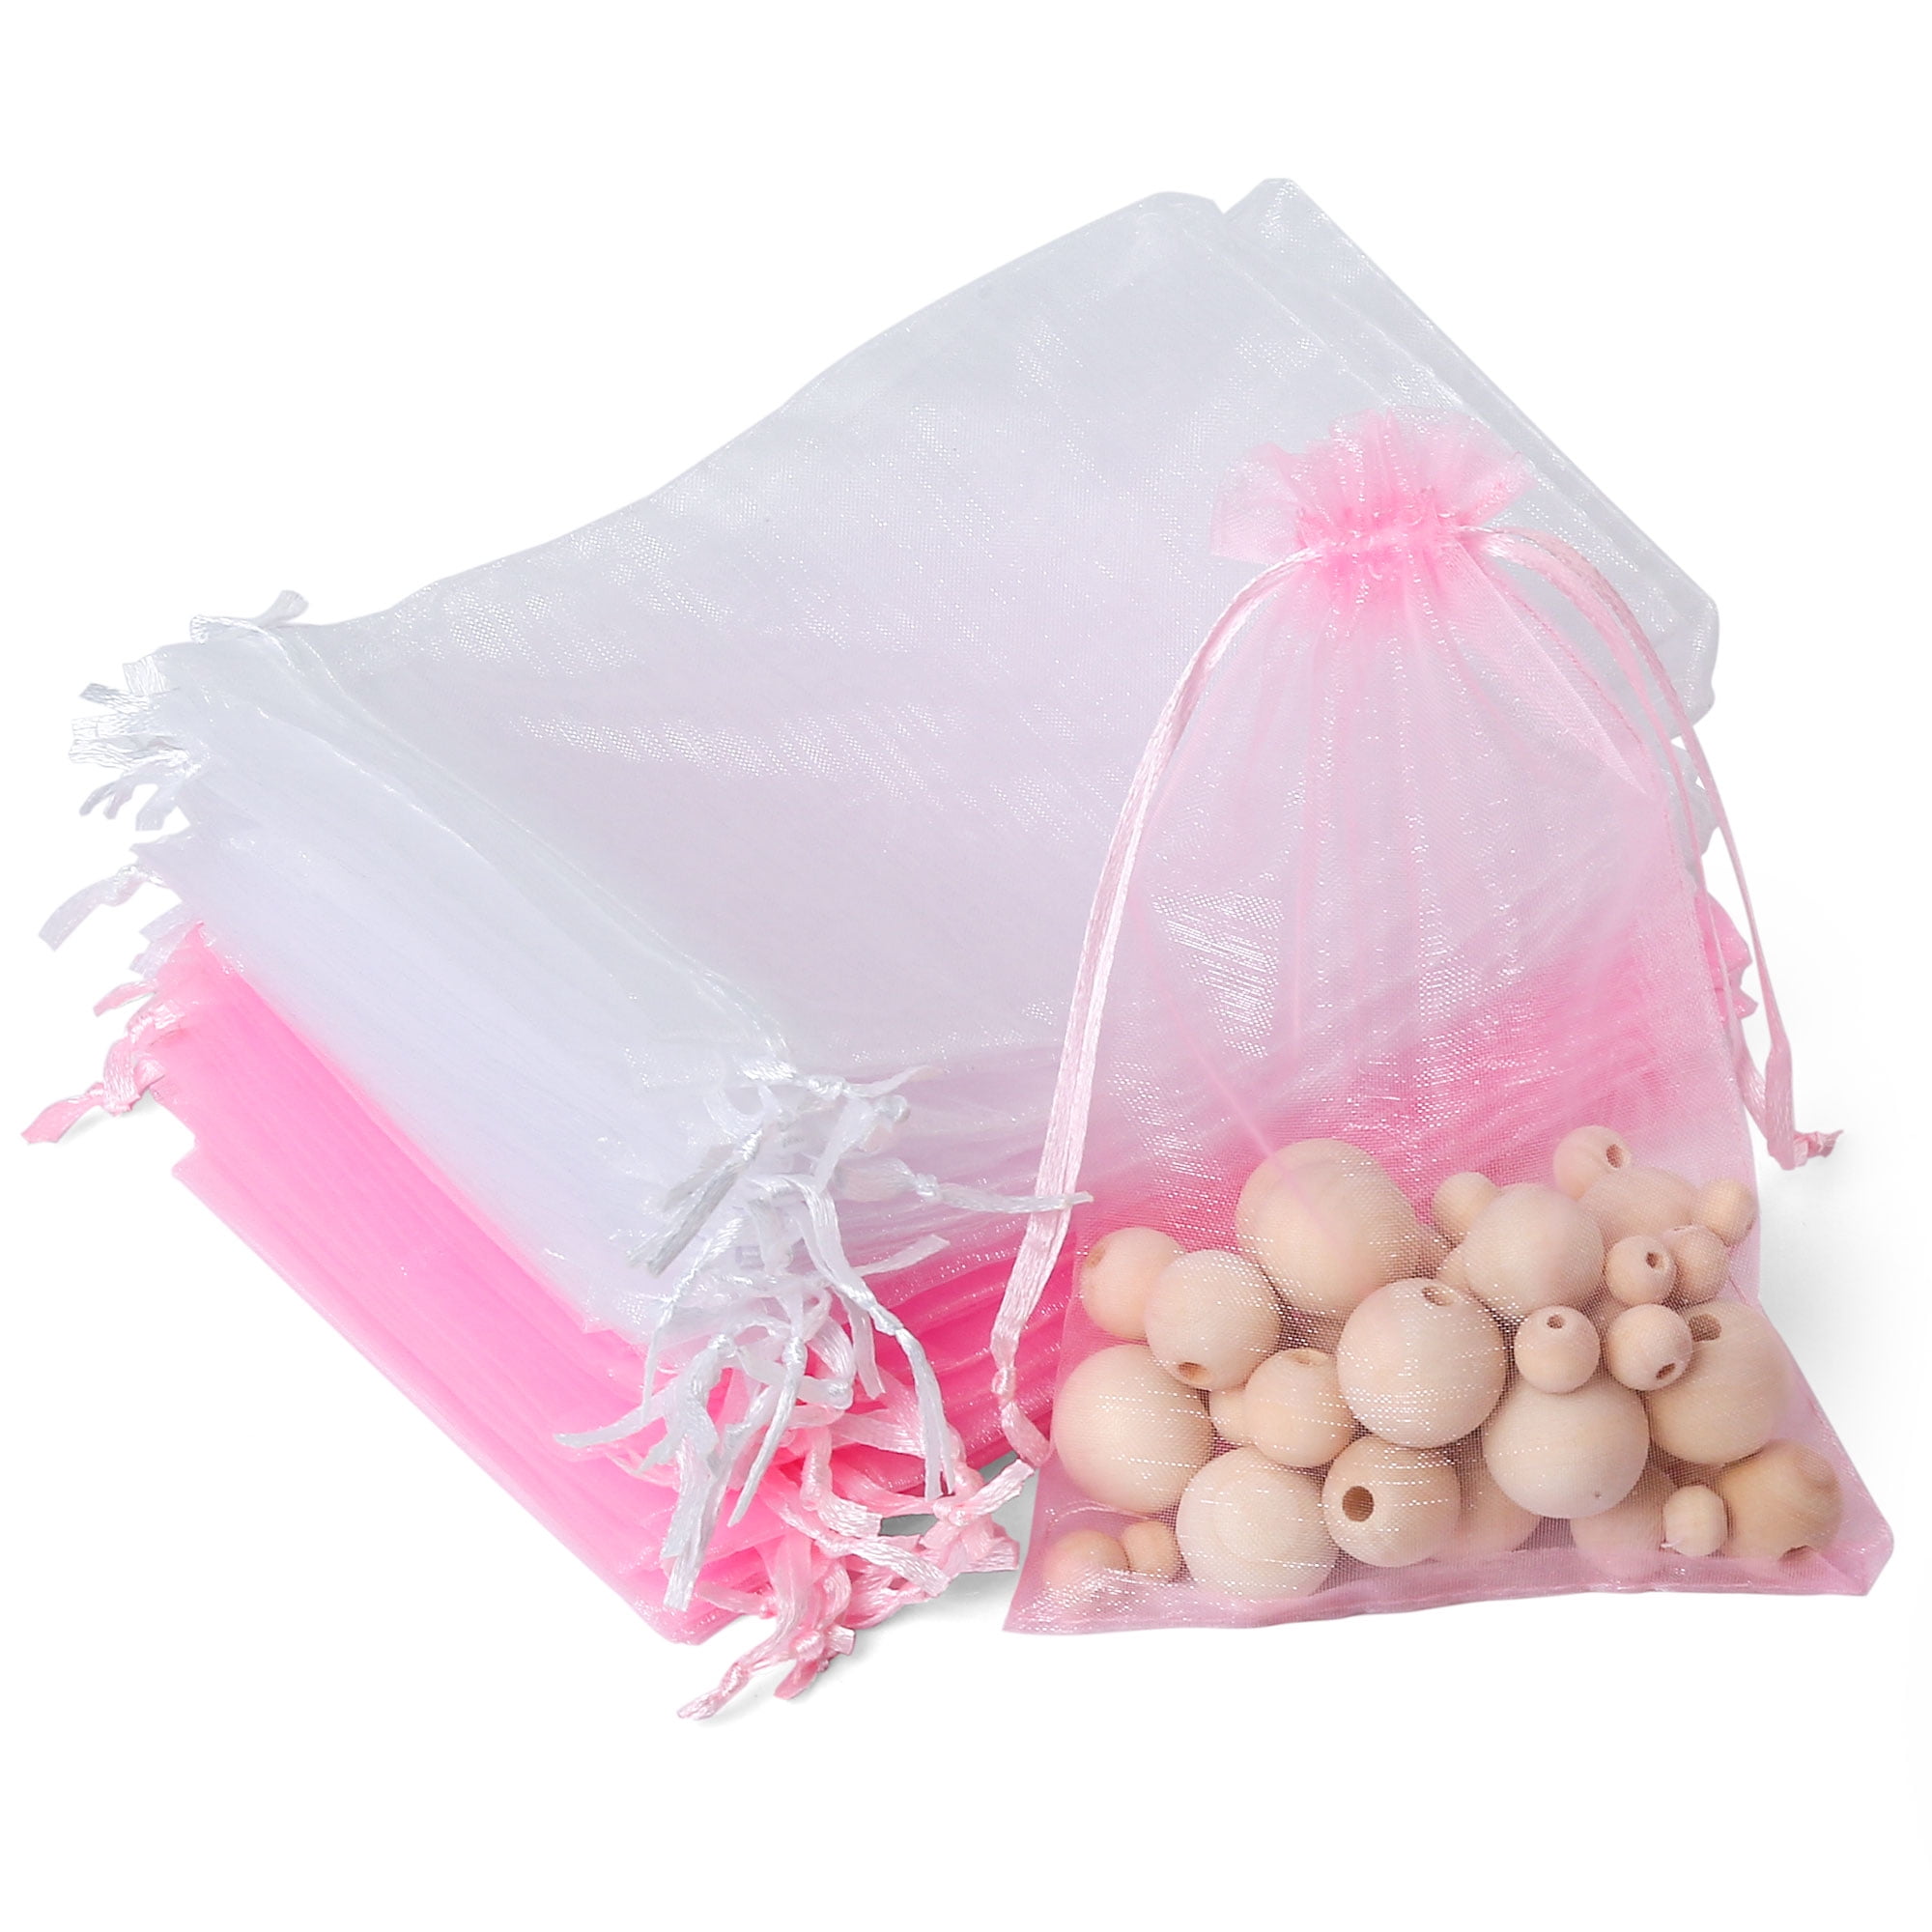 200 Sheer Organza Bags for Wedding Party Favor Bags - Small